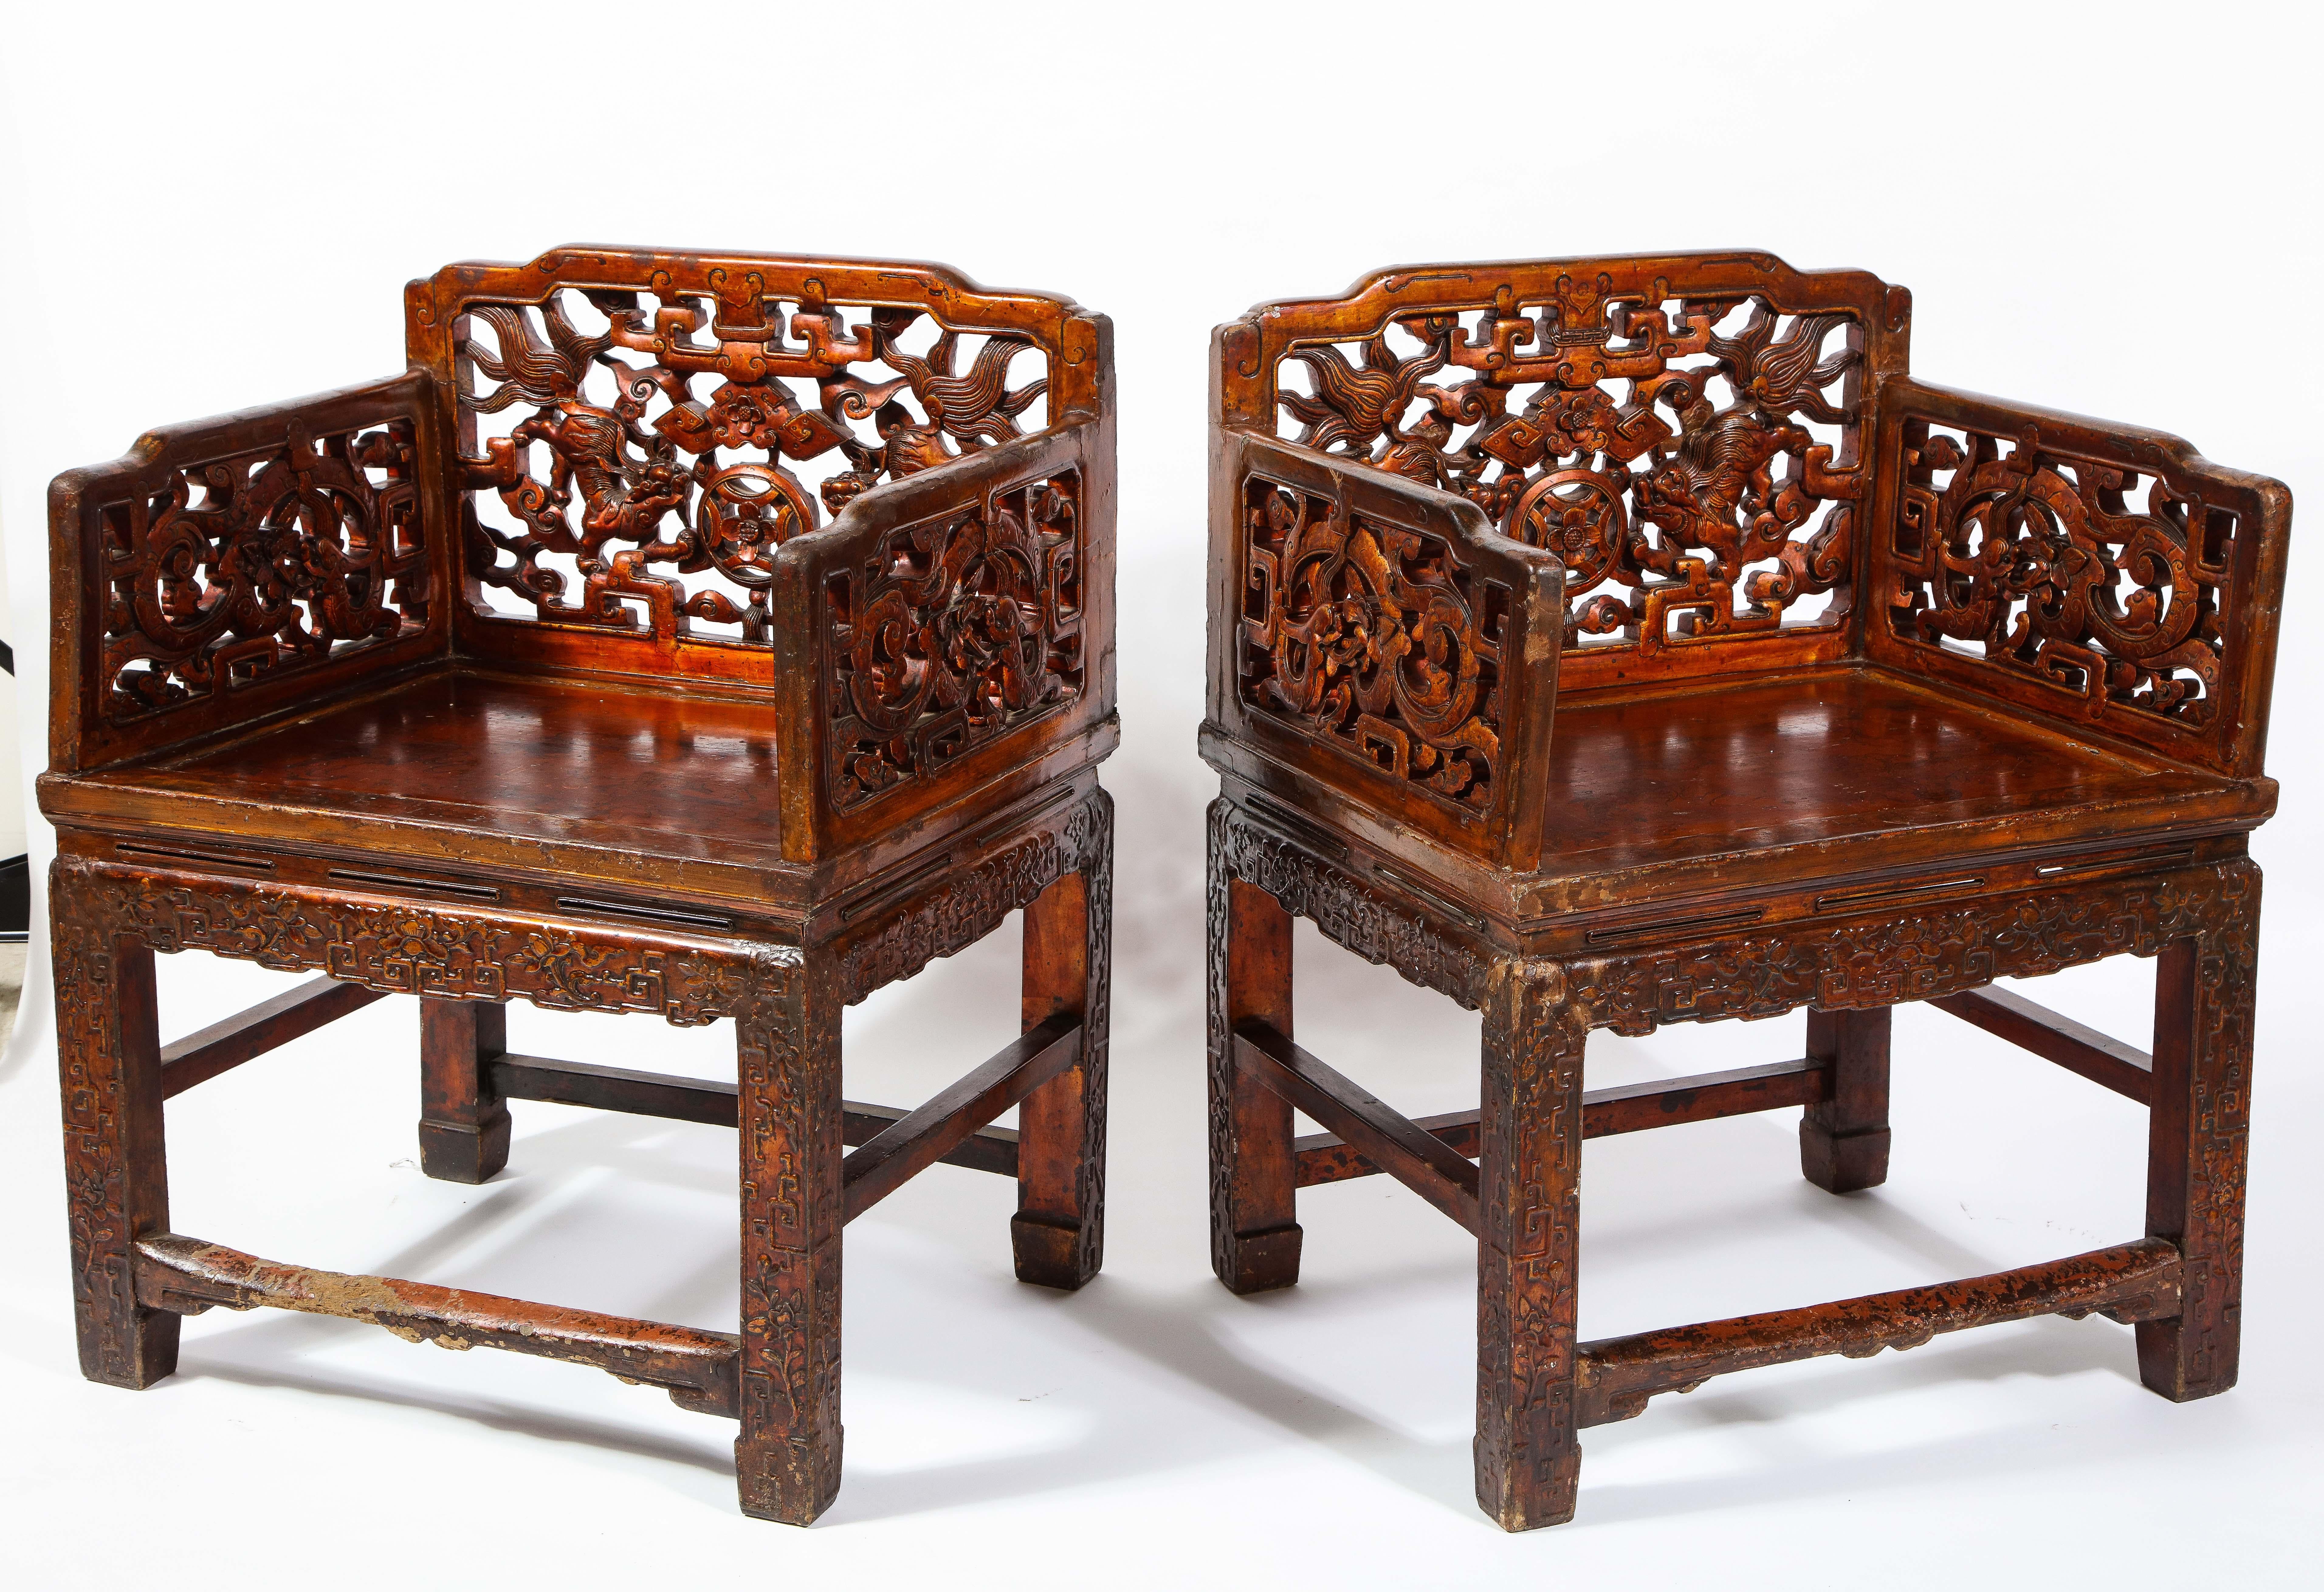 Qing Pair of 19th Century Chinese Lacquered Hardwood Open Work Throne Chairs